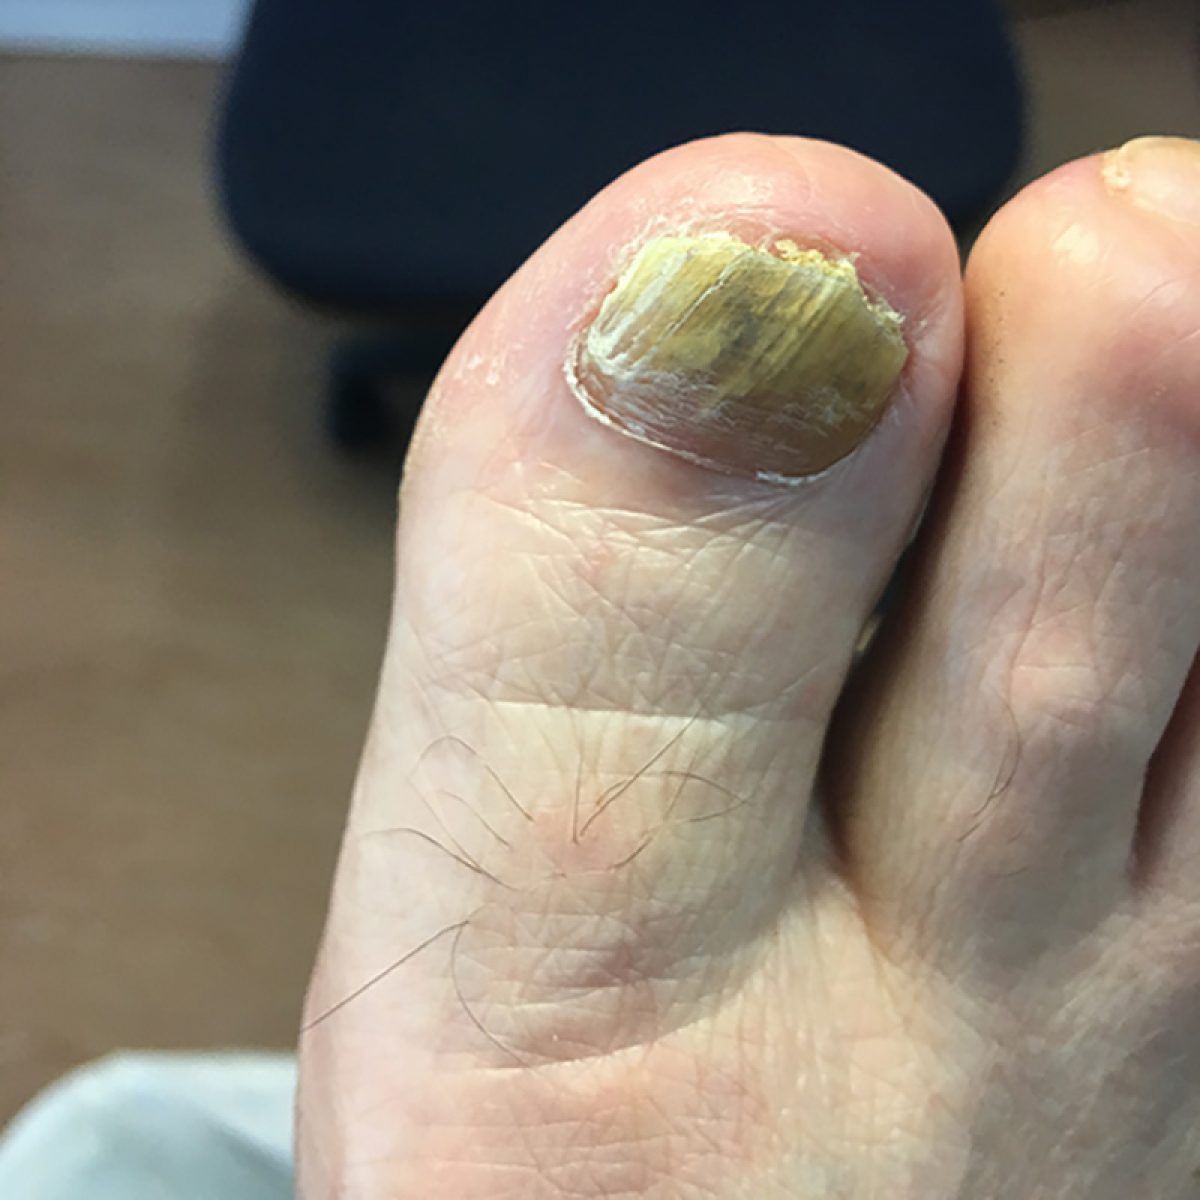 Fungal Nail Infection Causes, Symptoms and Treatment